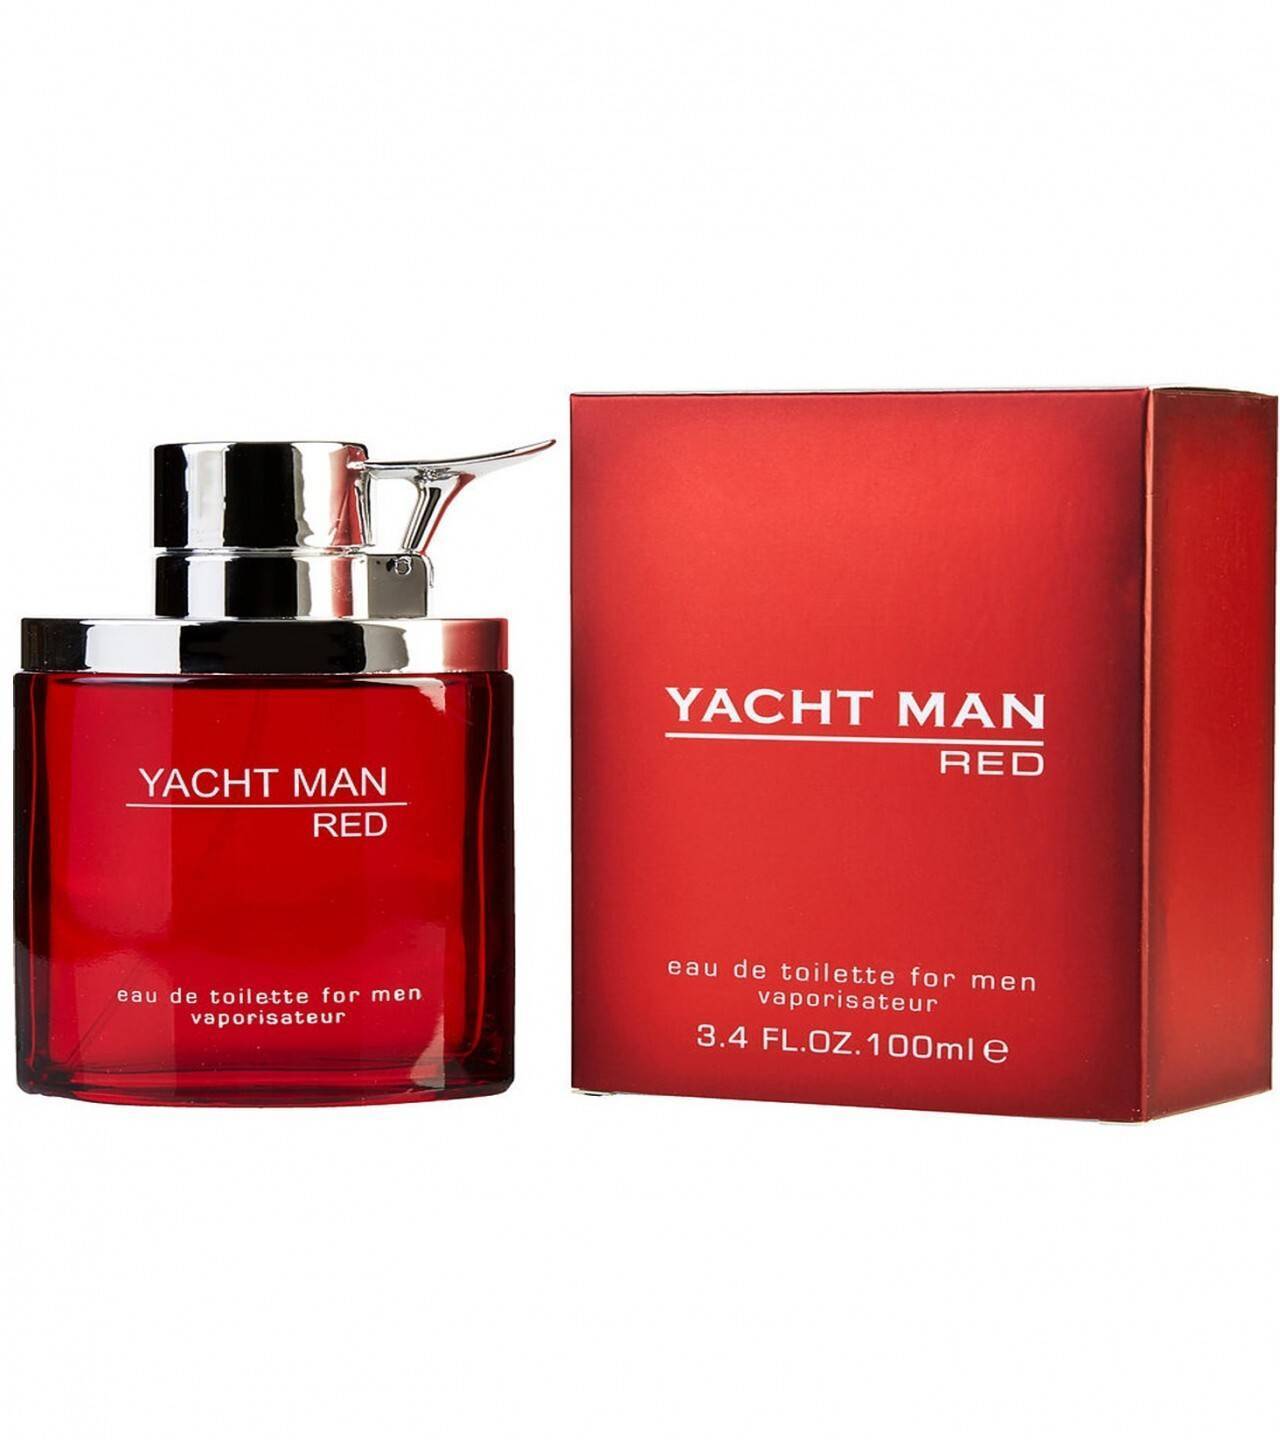 yacht man red price in pakistan